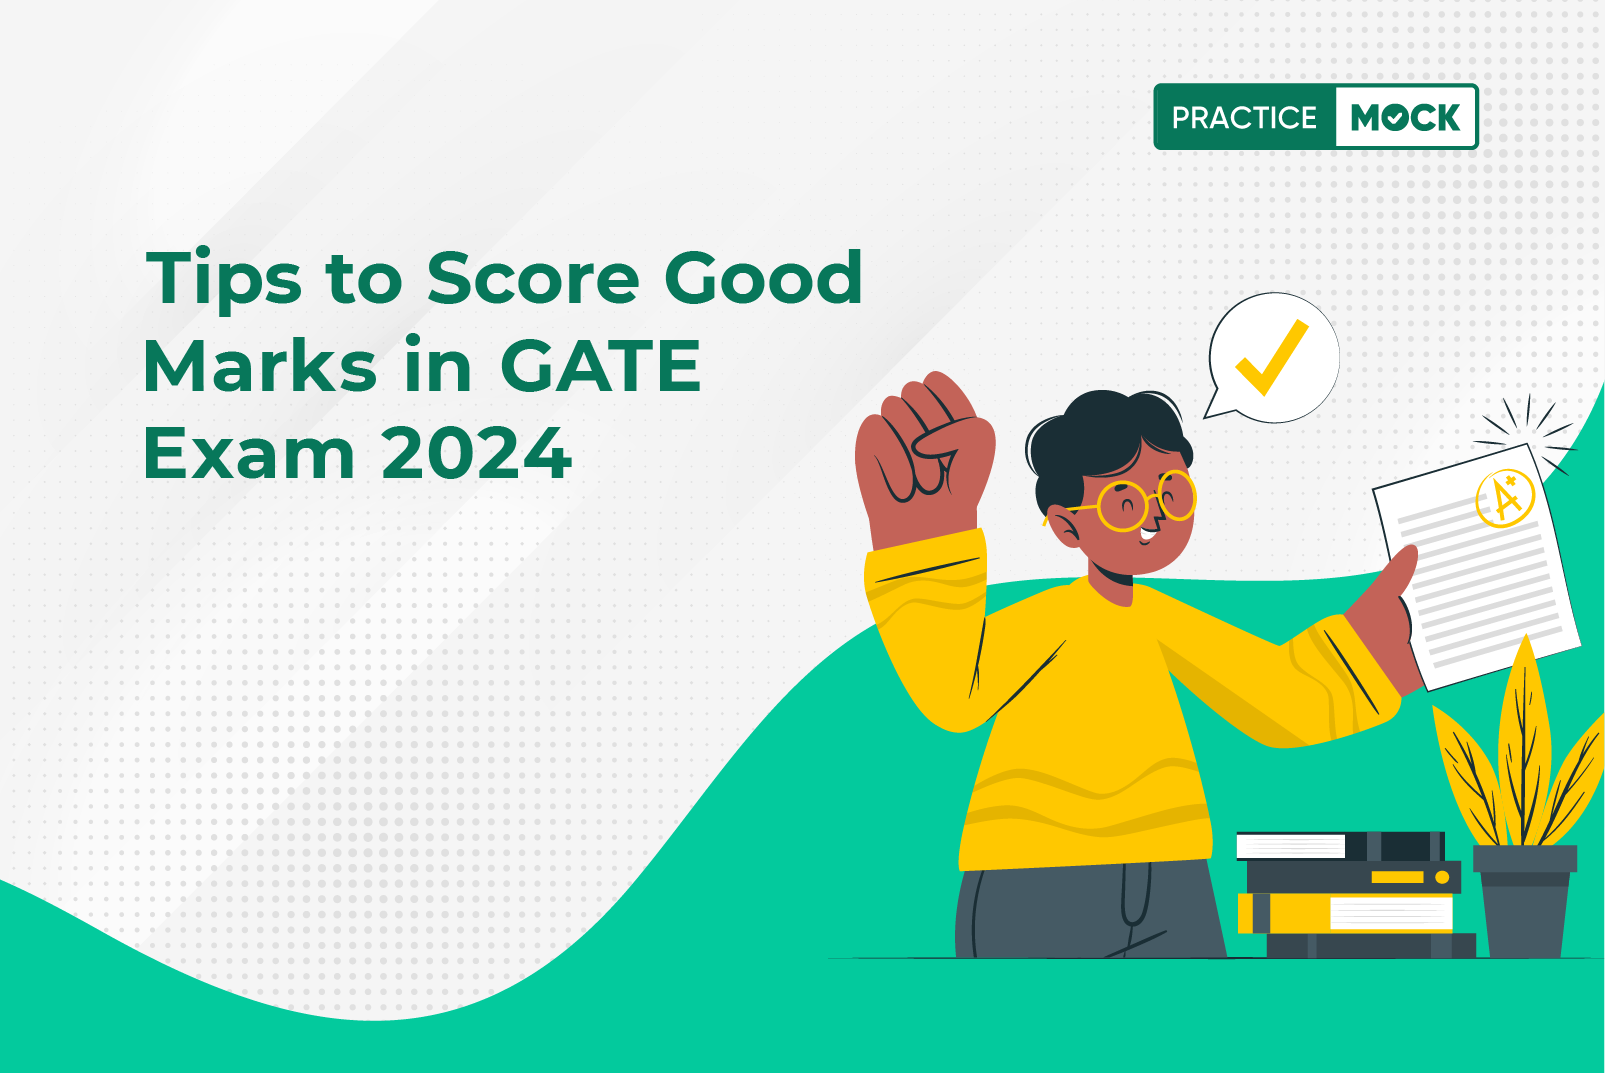 Tips to Score Good Marks in GATE Exam 2024 PracticeMock